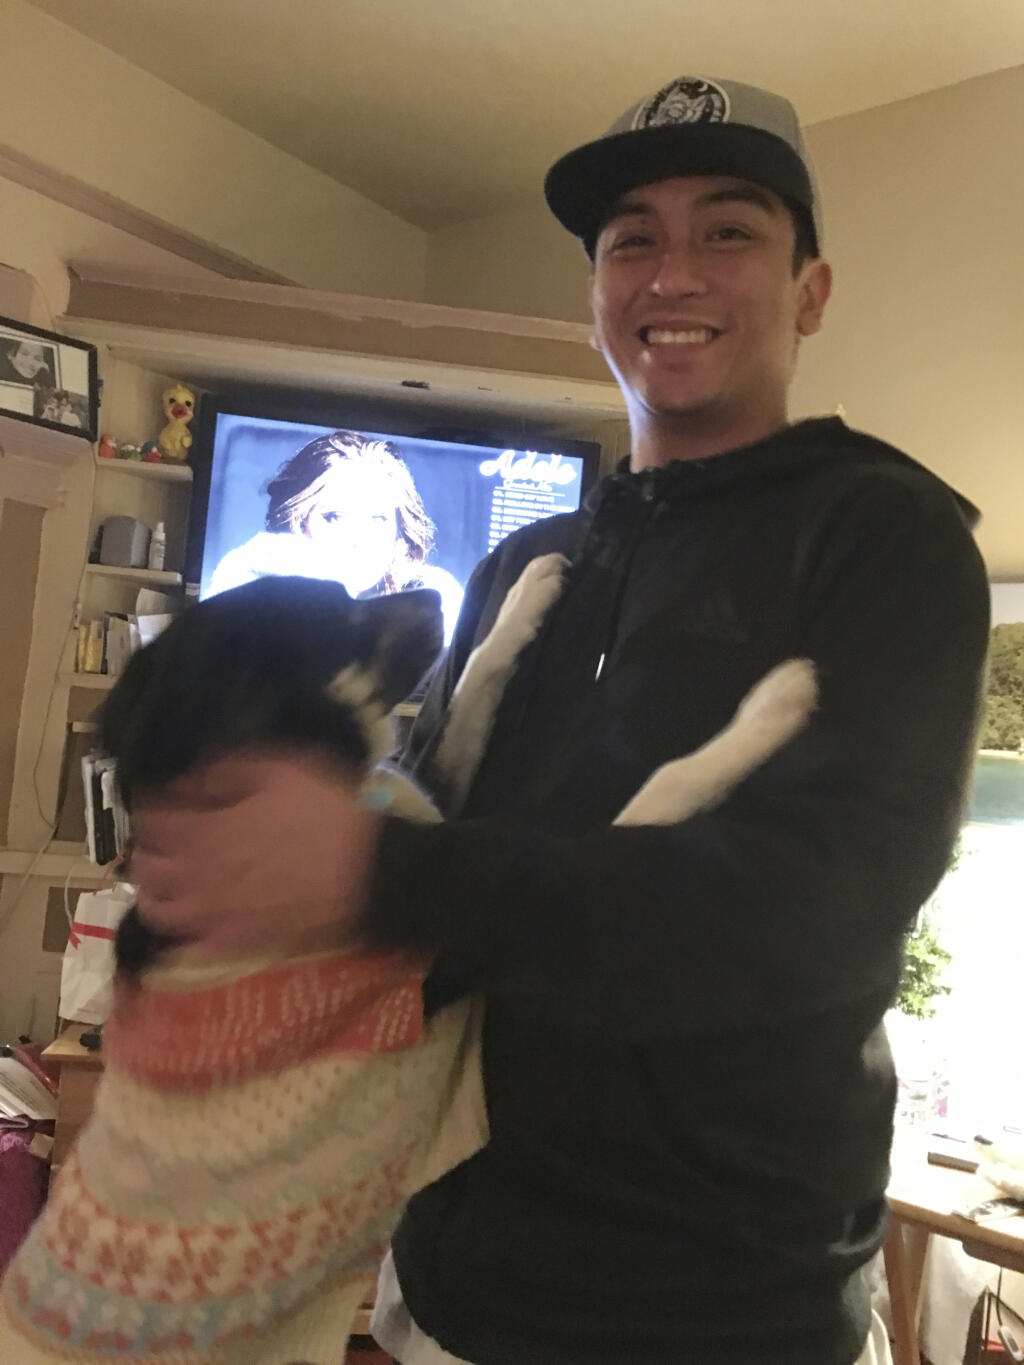 This Jan. 4, 2018 photo provided by Isabella Collins, Navy veteran Angelo Quinto smiles at his home in Berkeley, Calif. Quinto who was going through an episode of paranoia died after a Northern California police officer knelt on his neck for several minutes, his family said Tuesday, Feb. 23, 2021. The family called police on Dec. 23 because the 30-year-old was suffering a mental health crisis and needed help. His family says a responding officer knelt on Quinto's neck for nearly five minutes while another officer restrained him. He lost consciousness and was taken by ambulance to a hospital, where he died three days later. (Isabella Collins via AP)